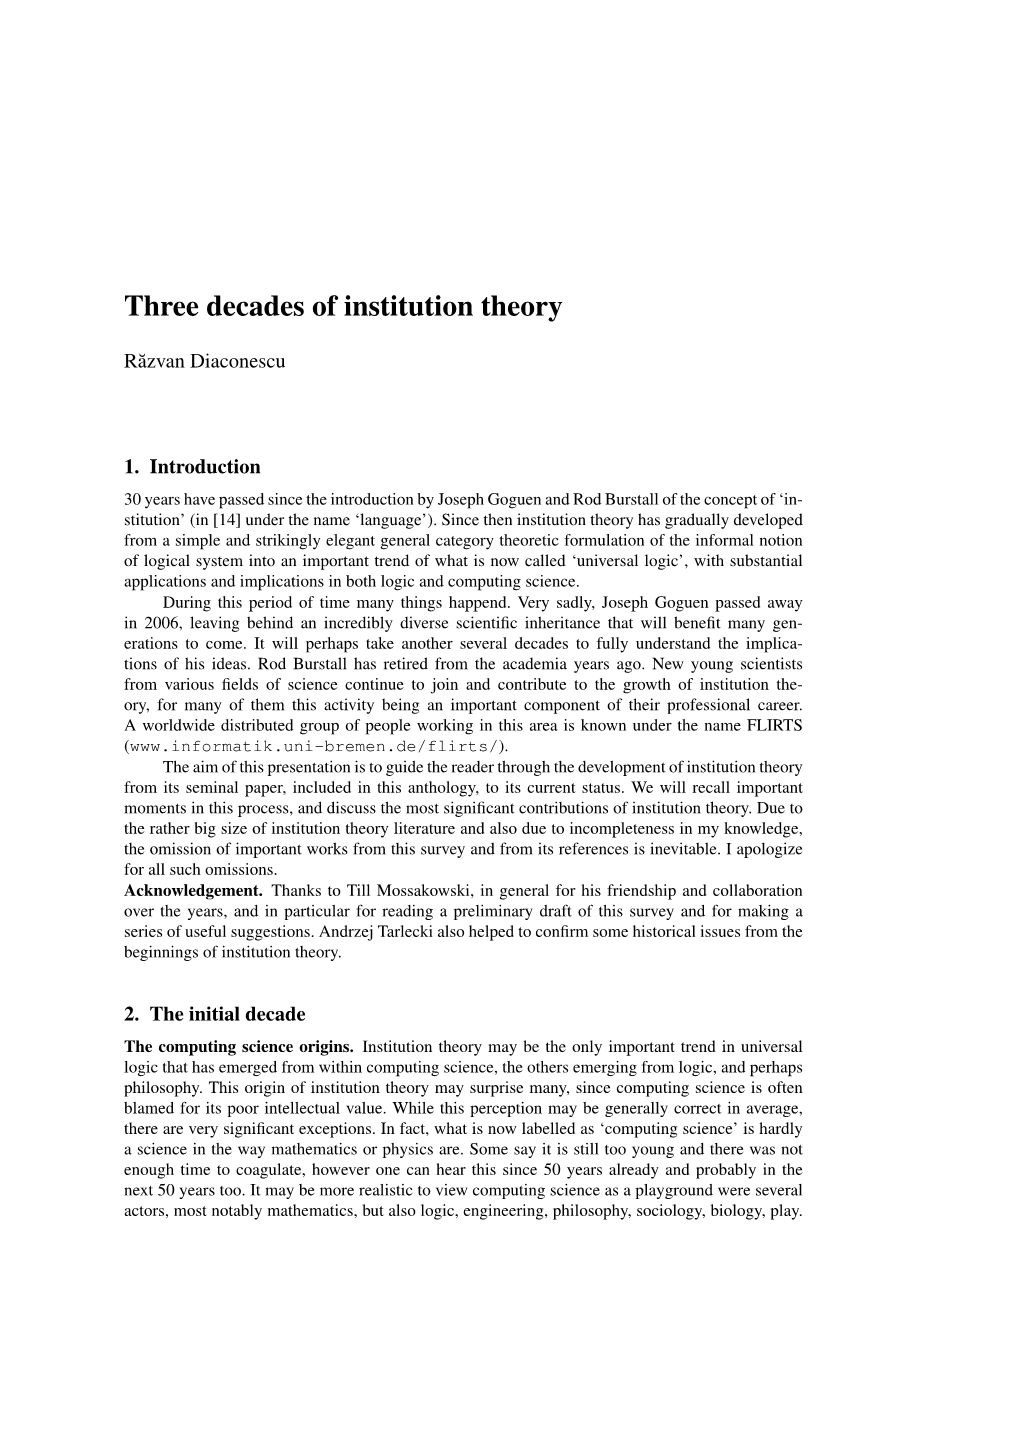 Three Decades of Institution Theory